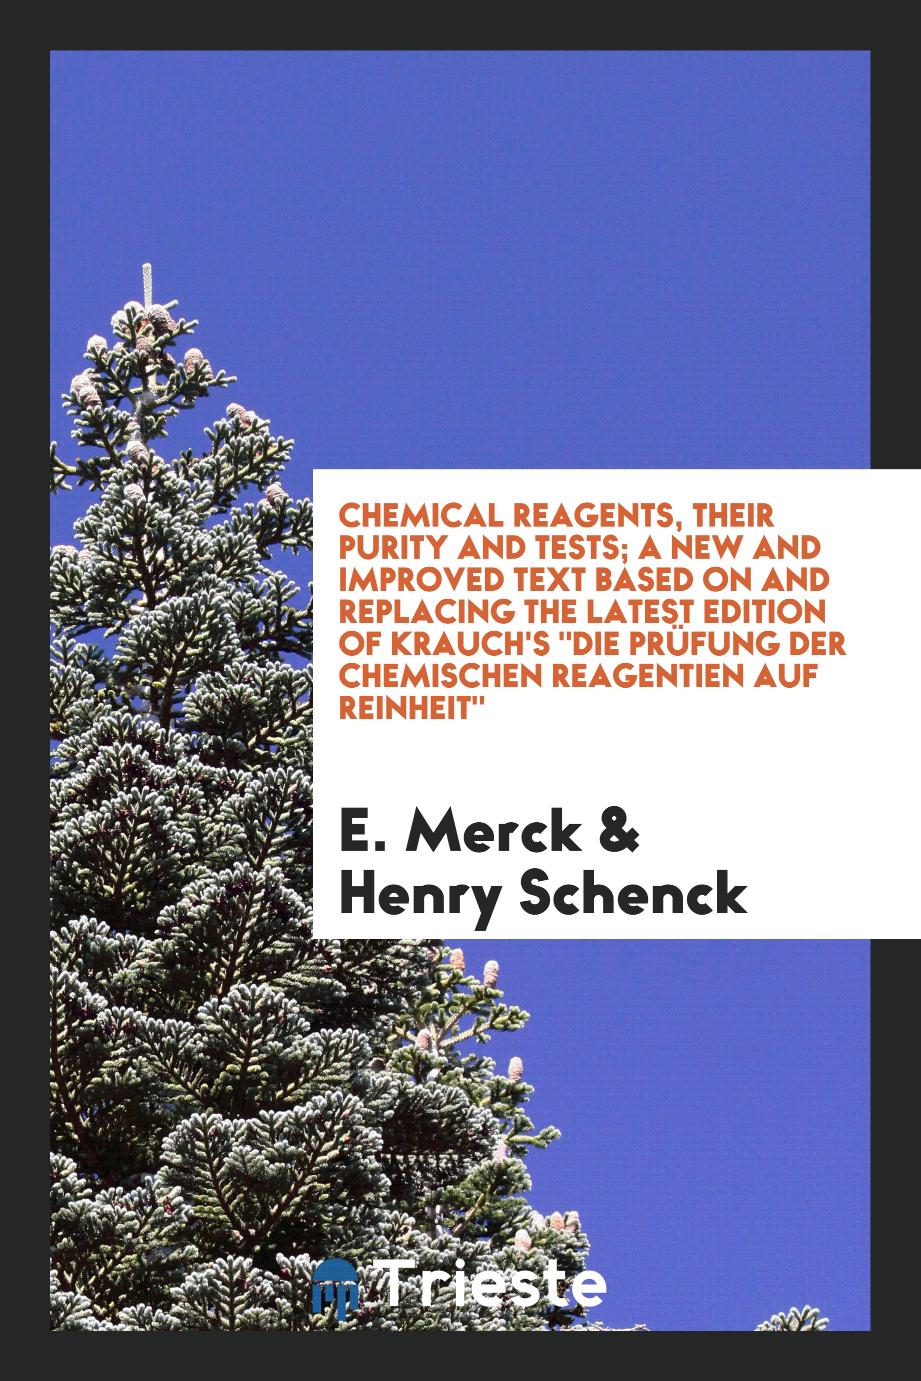 Chemical reagents, their purity and tests; a new and improved text based on and replacing the latest edition of Krauch's "Die prüfung der chemischen reagentien auf reinheit"